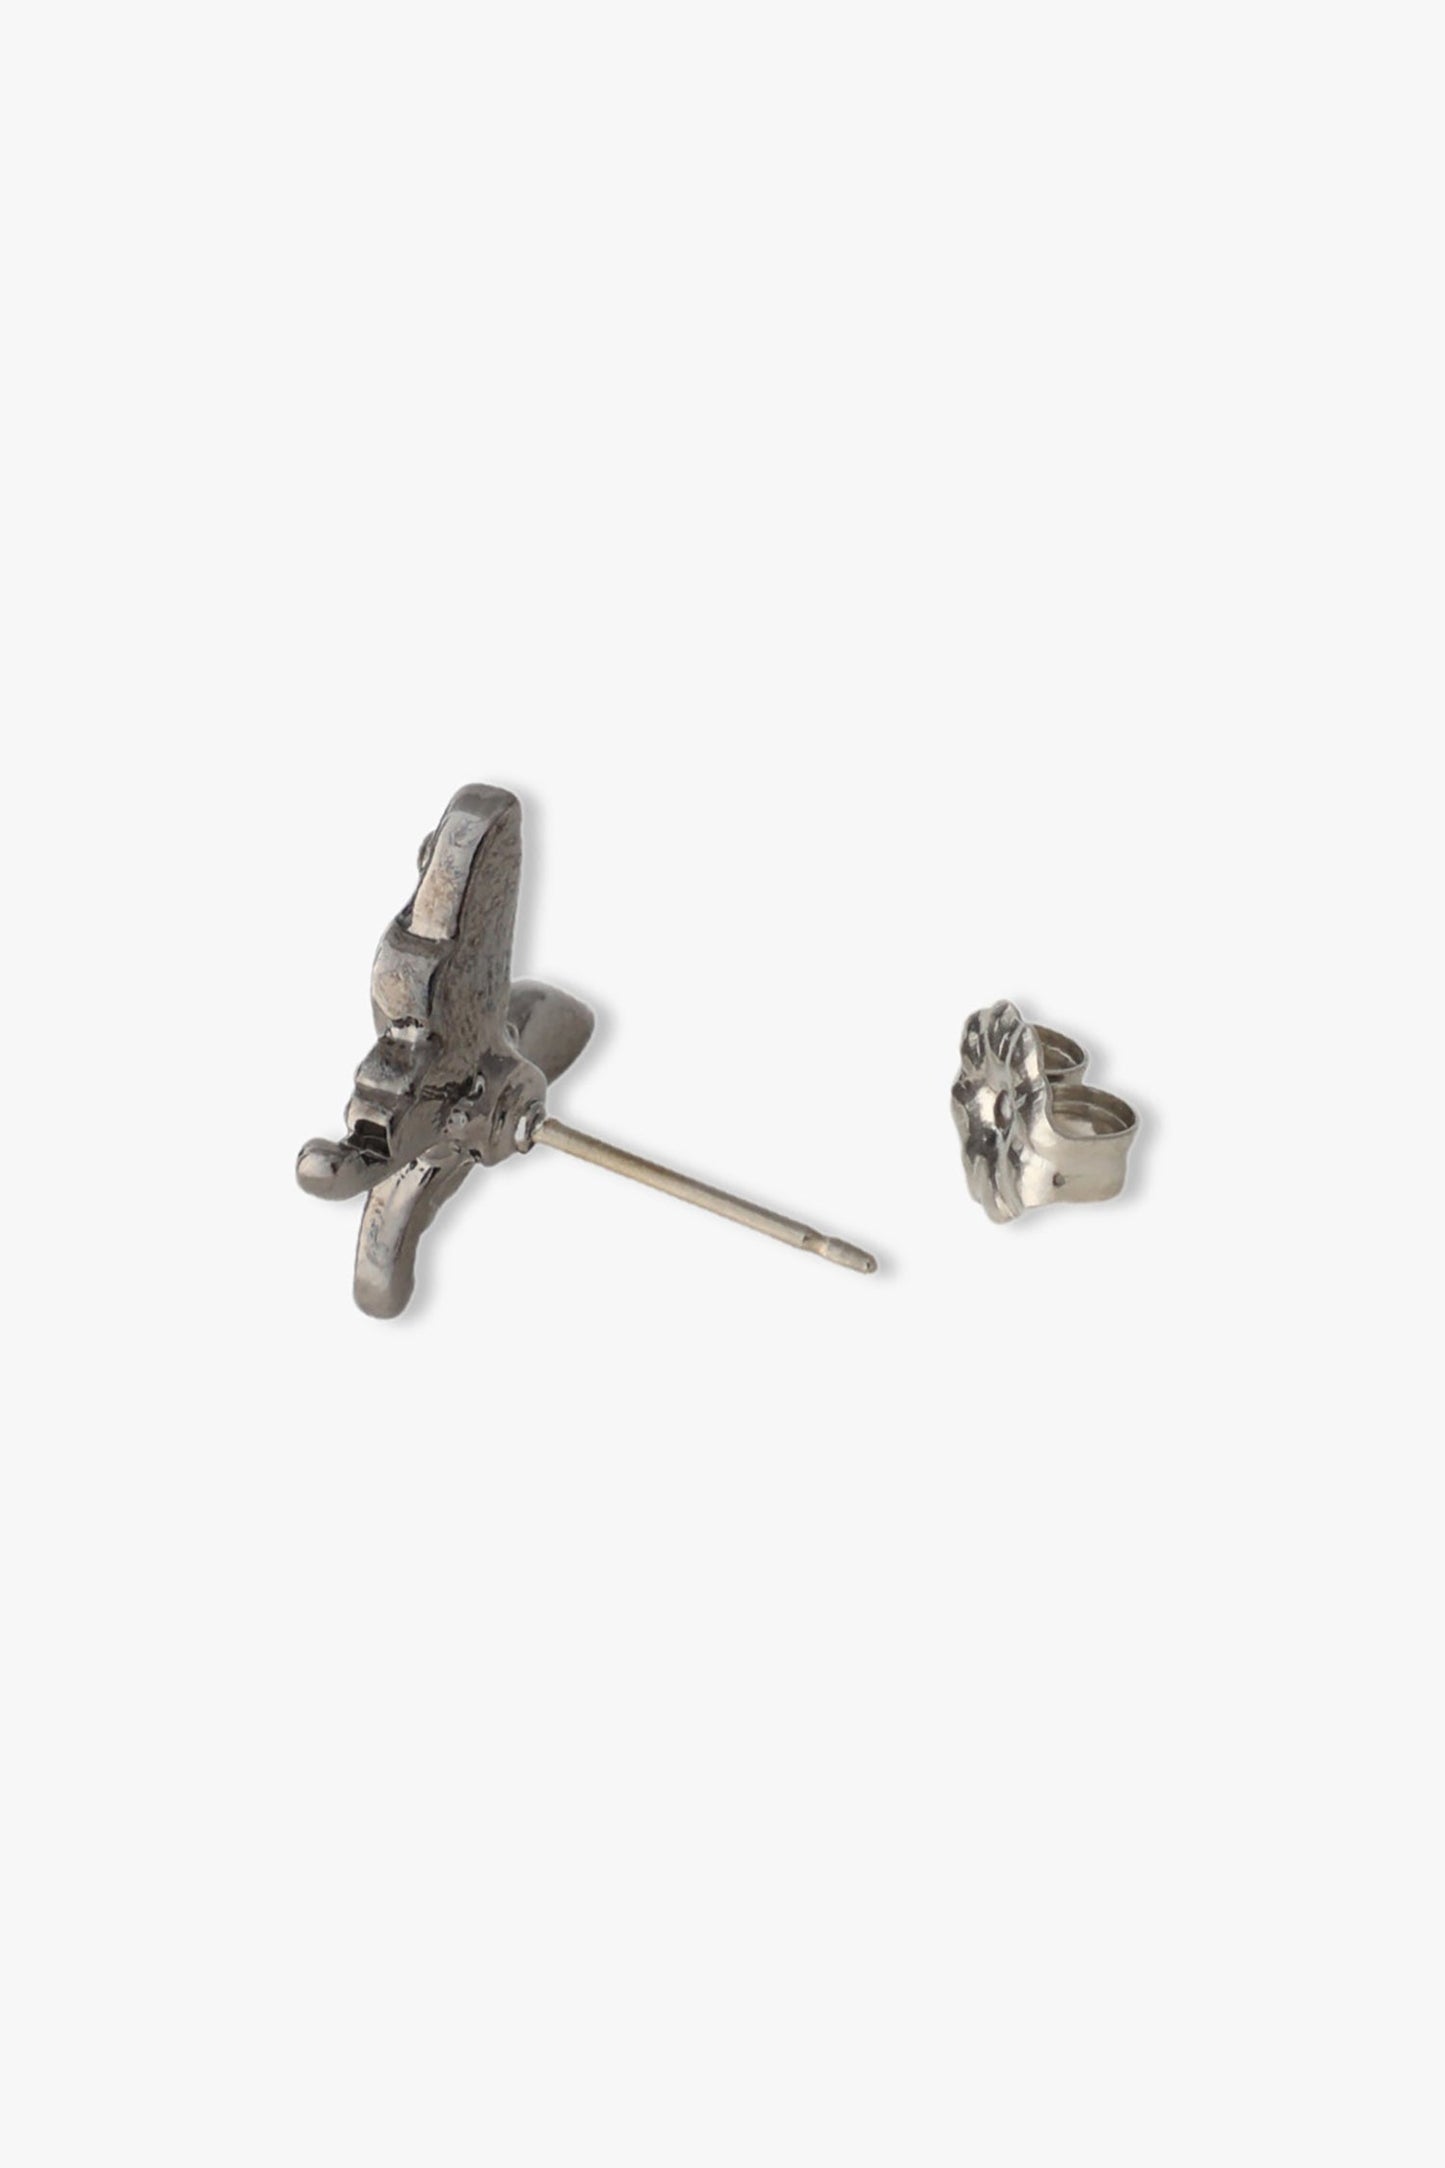 Detail of the Butterfly Stud system Earrings gunmetal plating